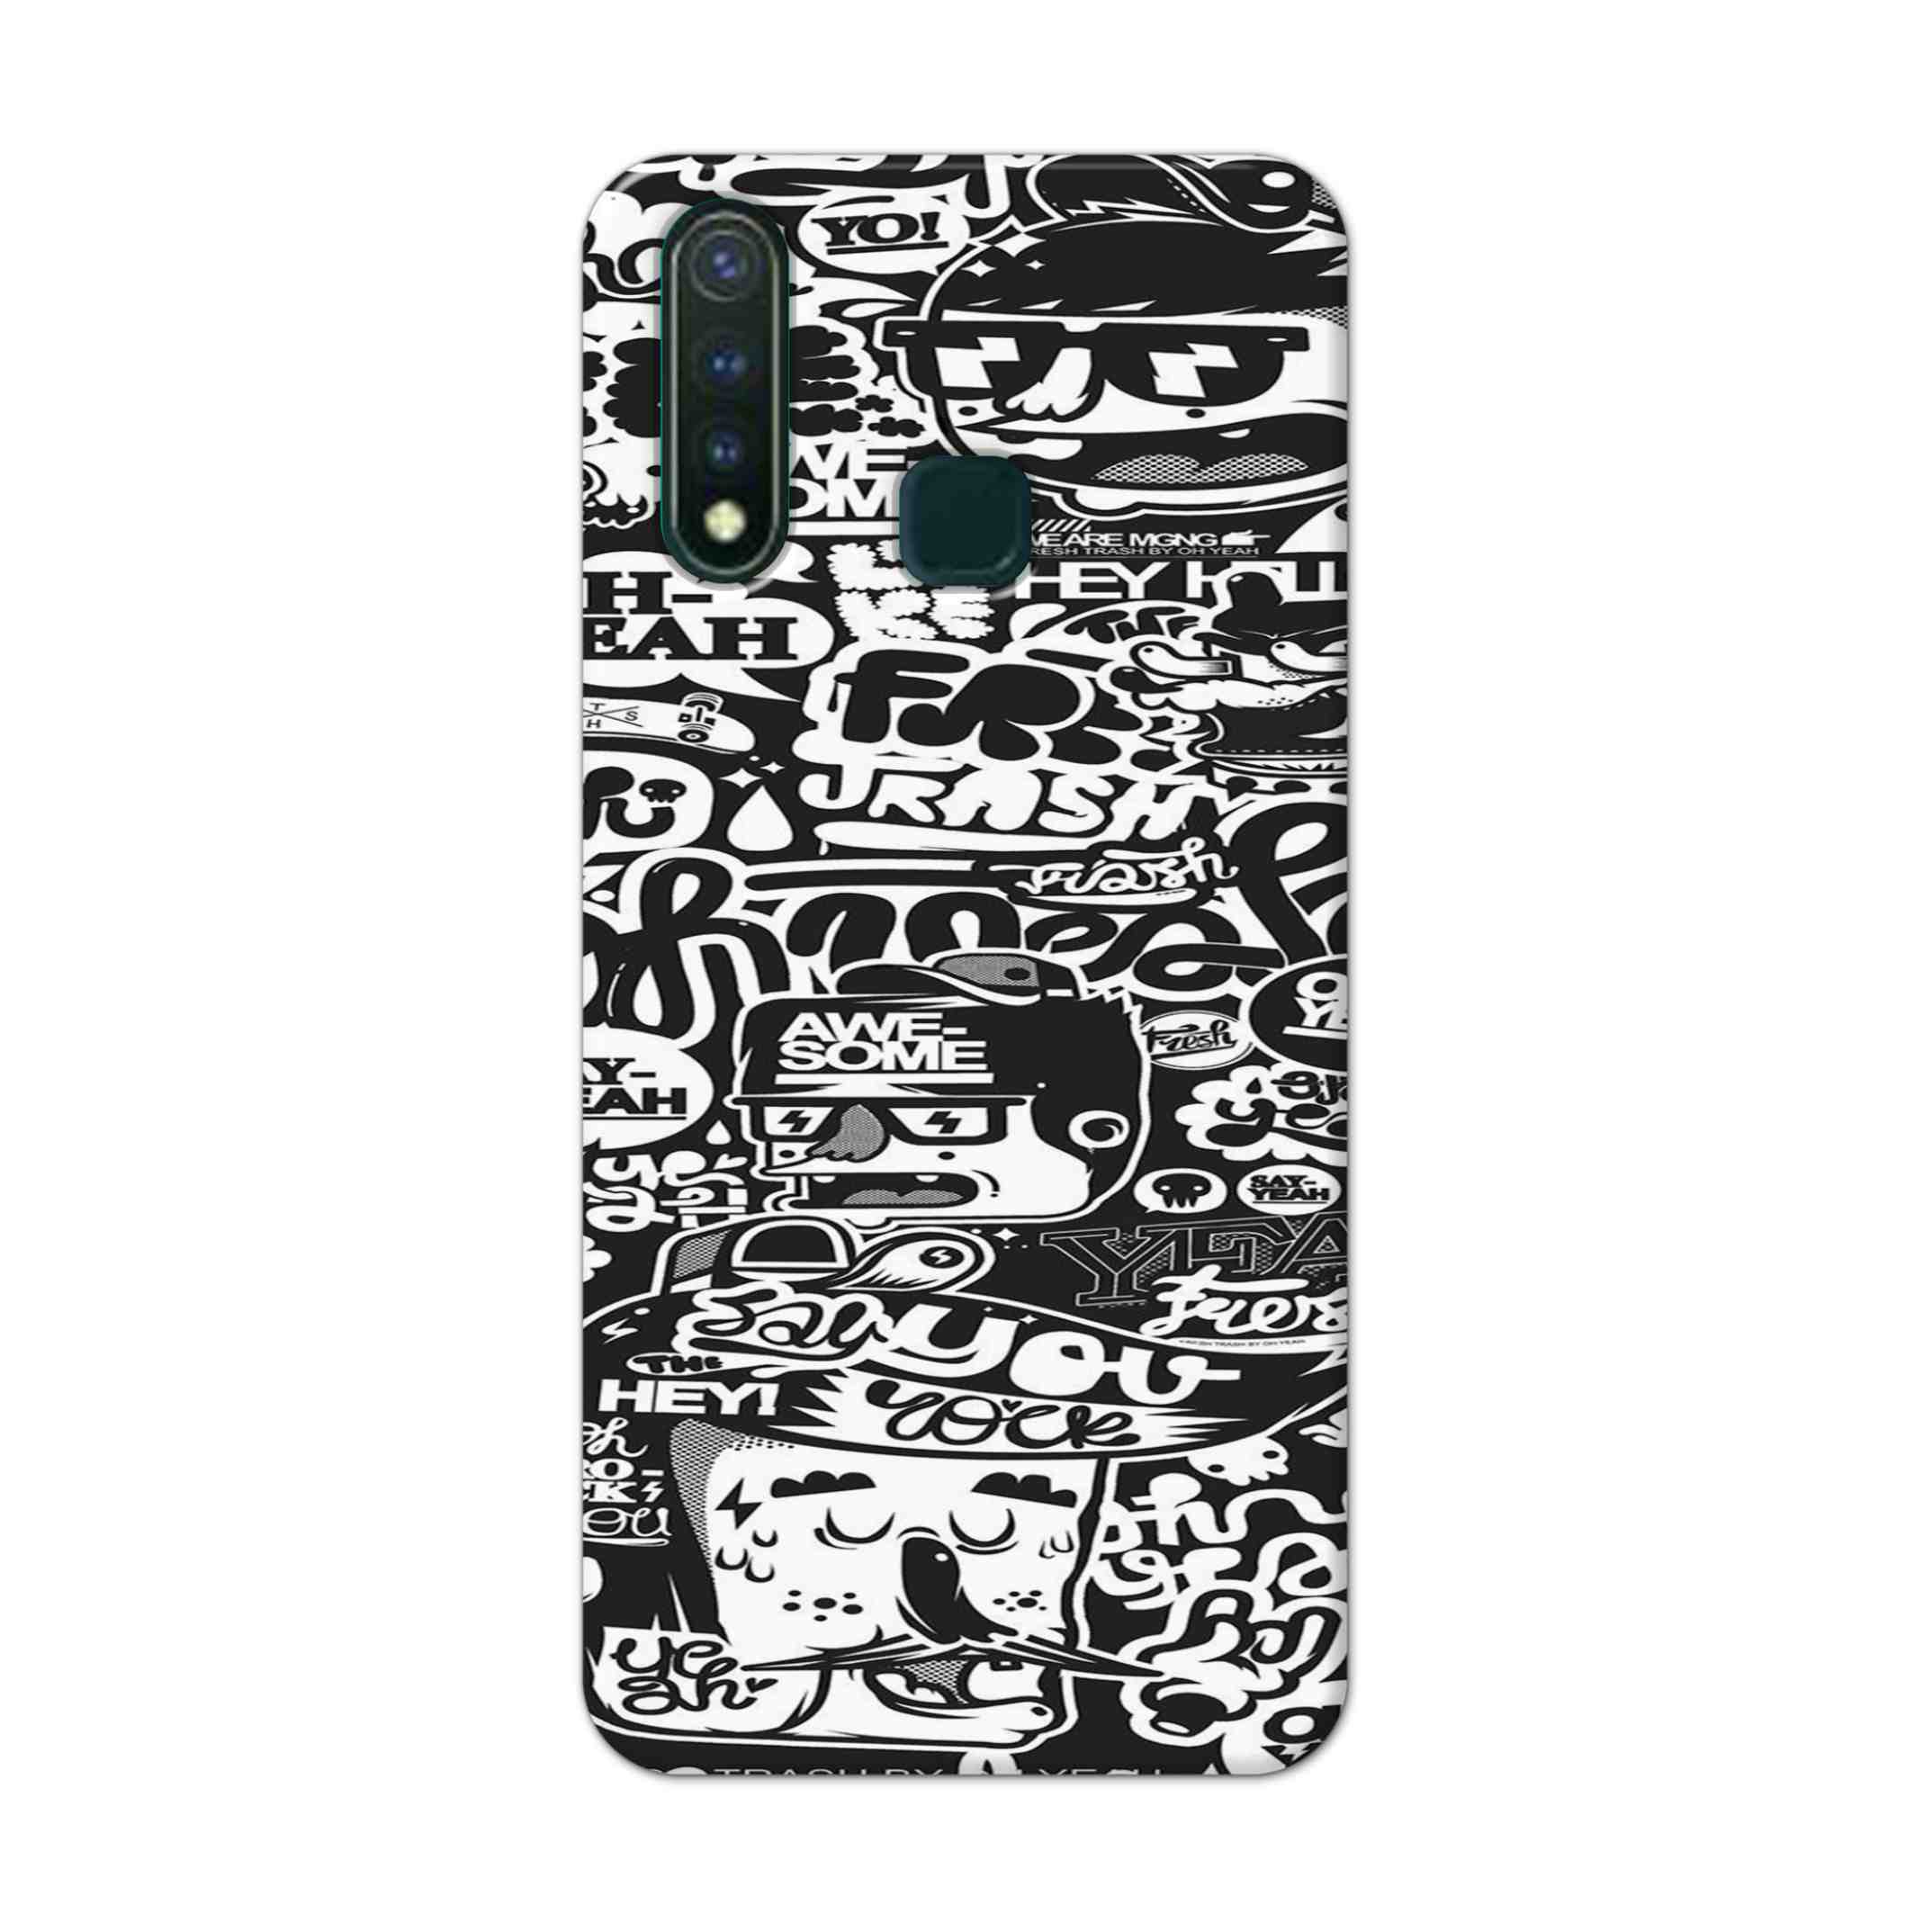 Buy Awesome Hard Back Mobile Phone Case Cover For Vivo Y19 Online